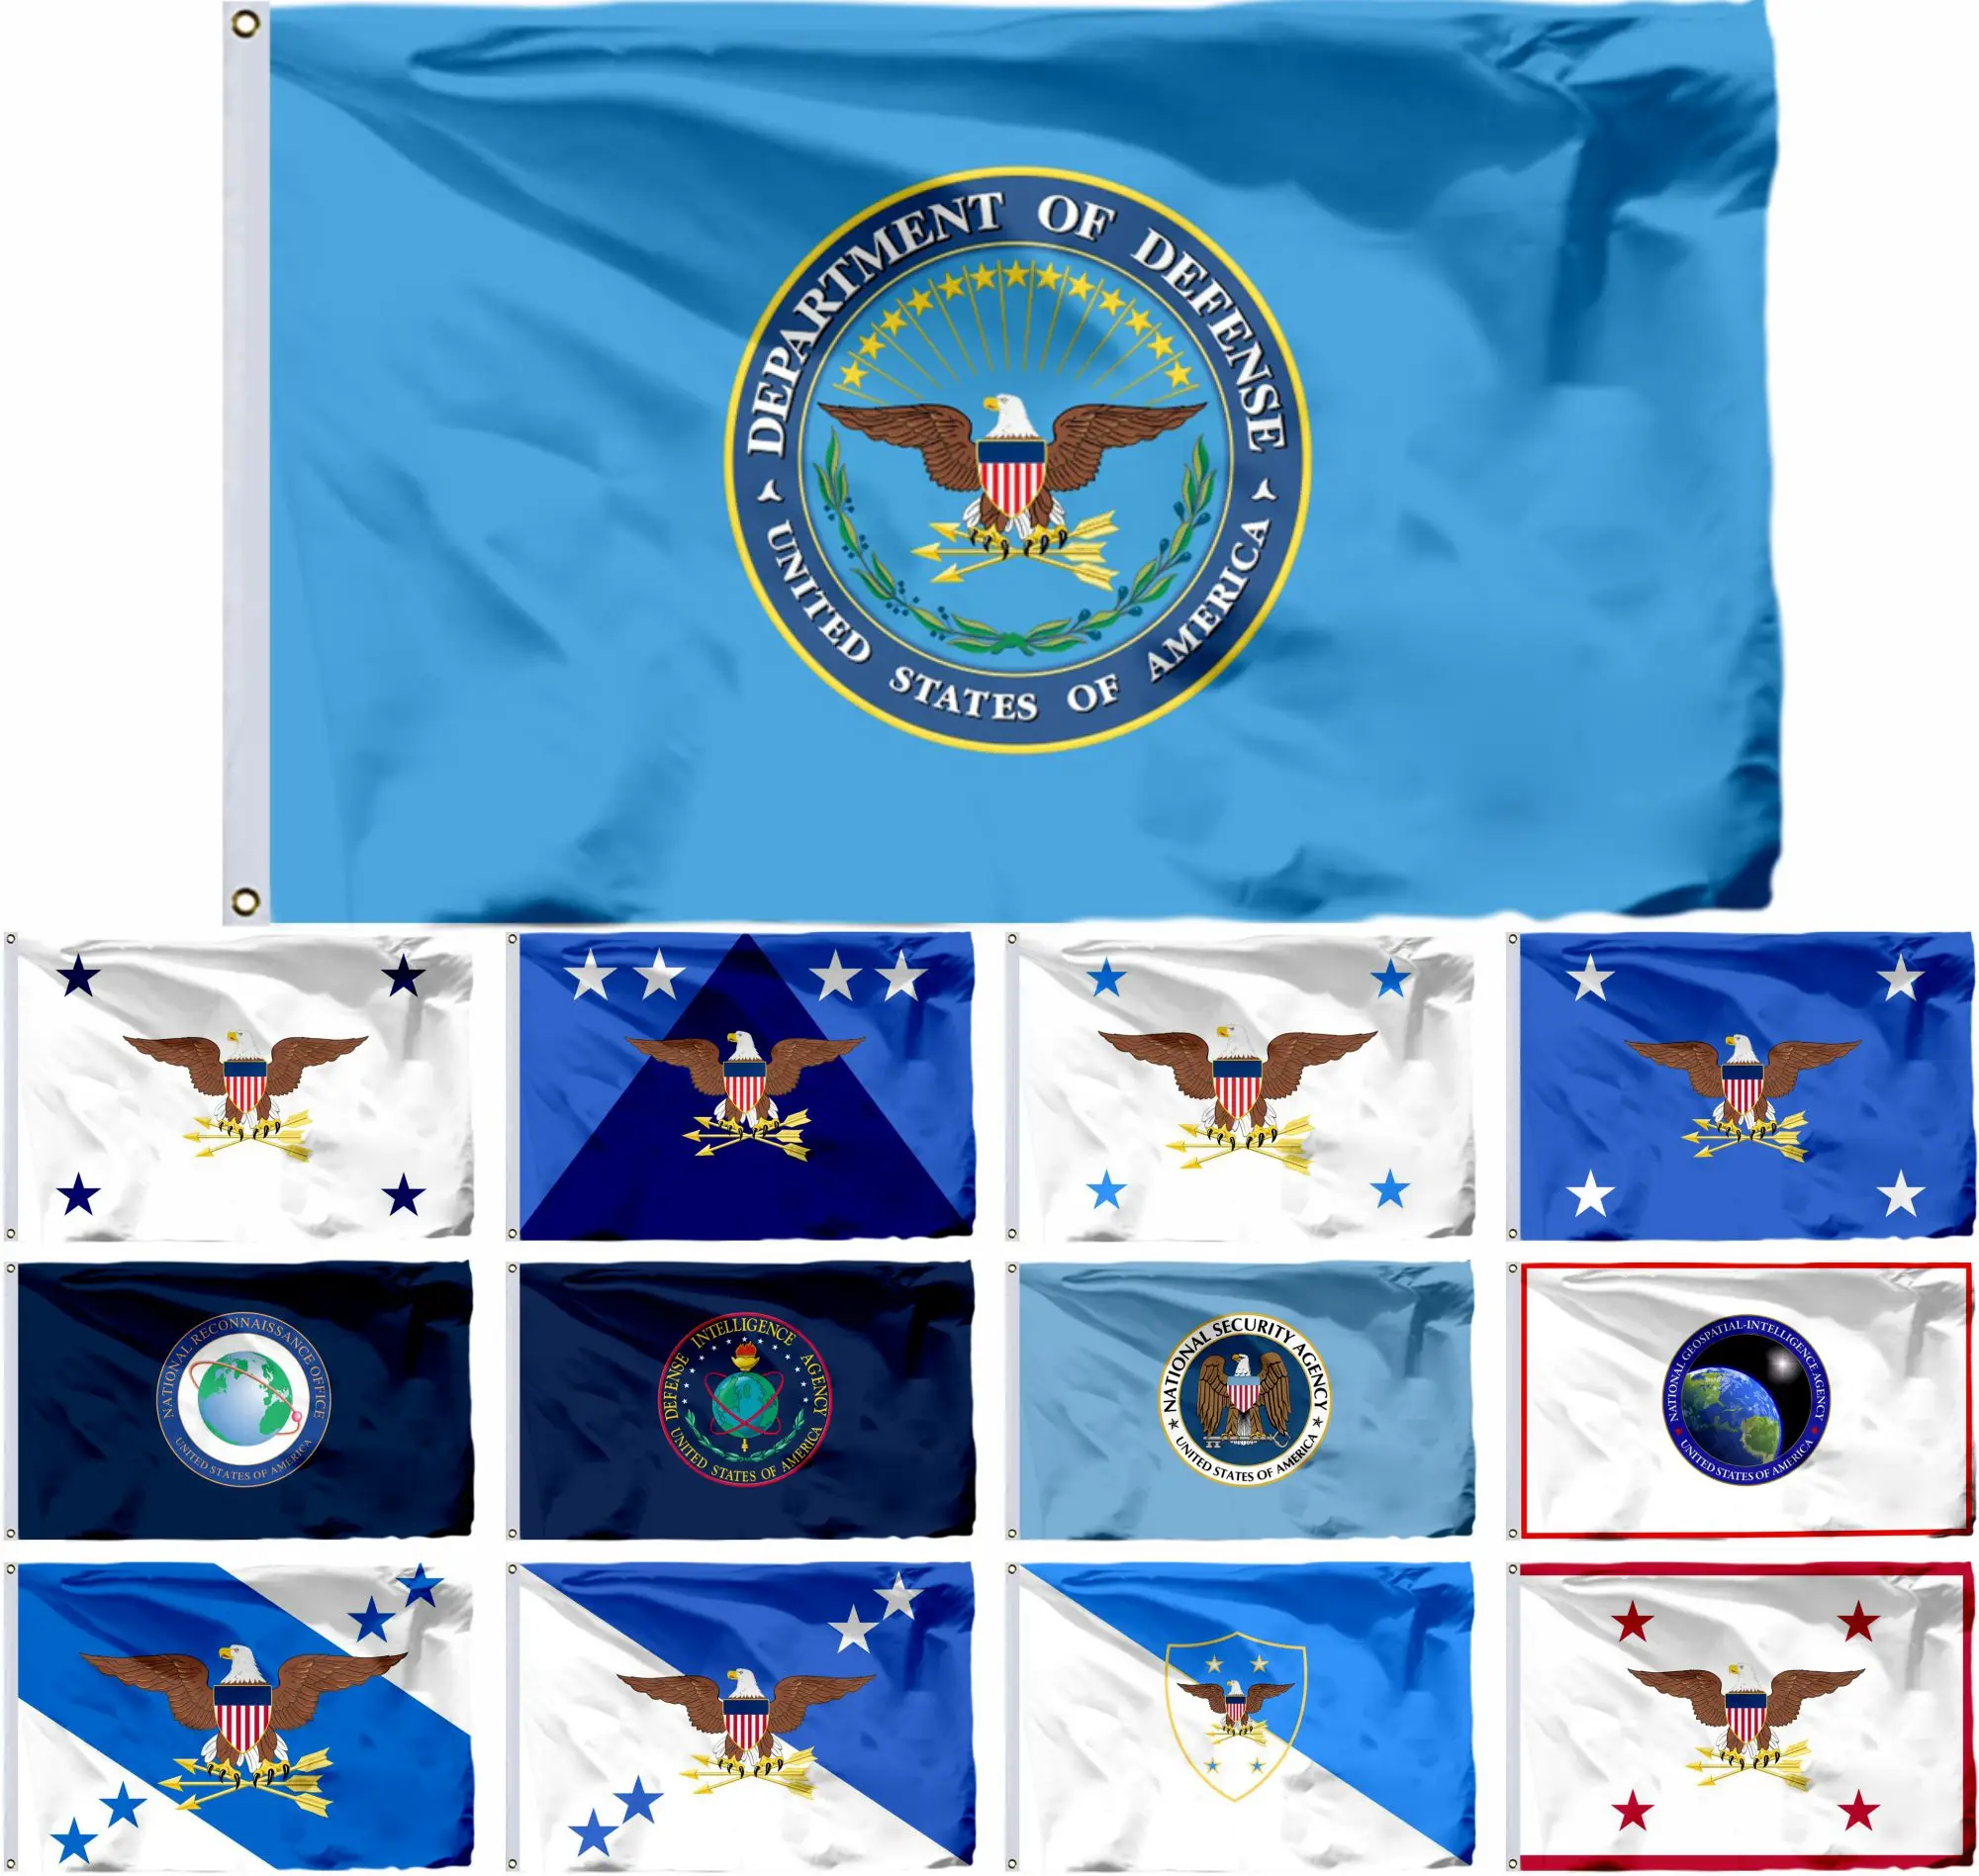 

USA Department Defense Seal Flag 90x150cm 3x5ft US NGA American NRO United States Flags and National Security Agency Banners